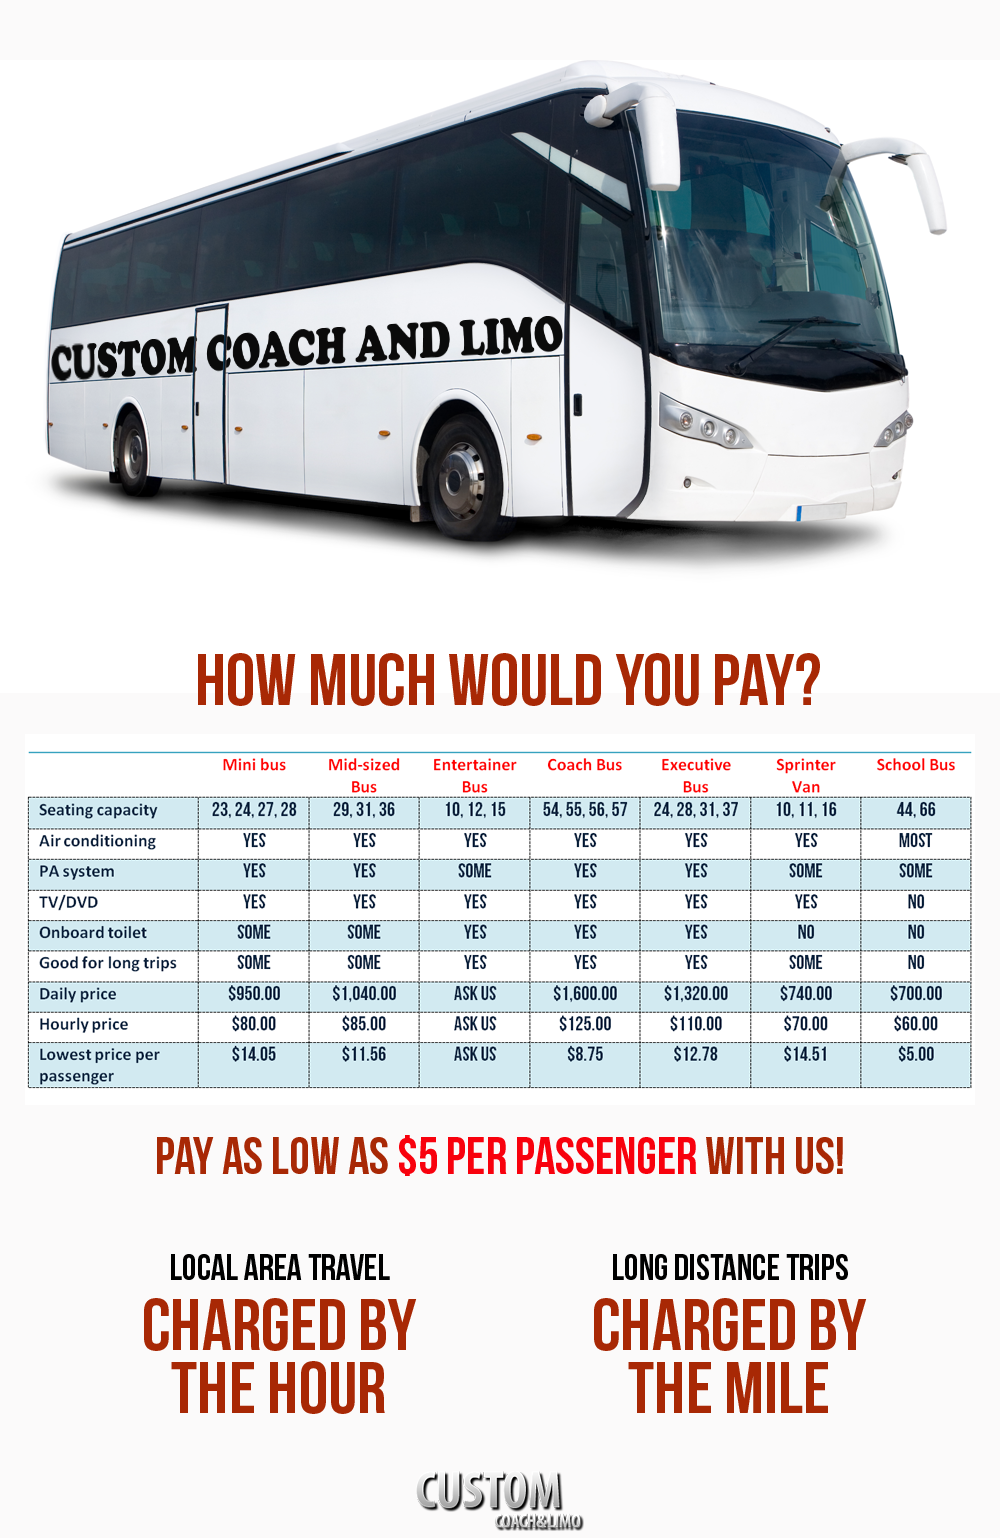 Buy Bus Tickets from $6 or Charter a Bus